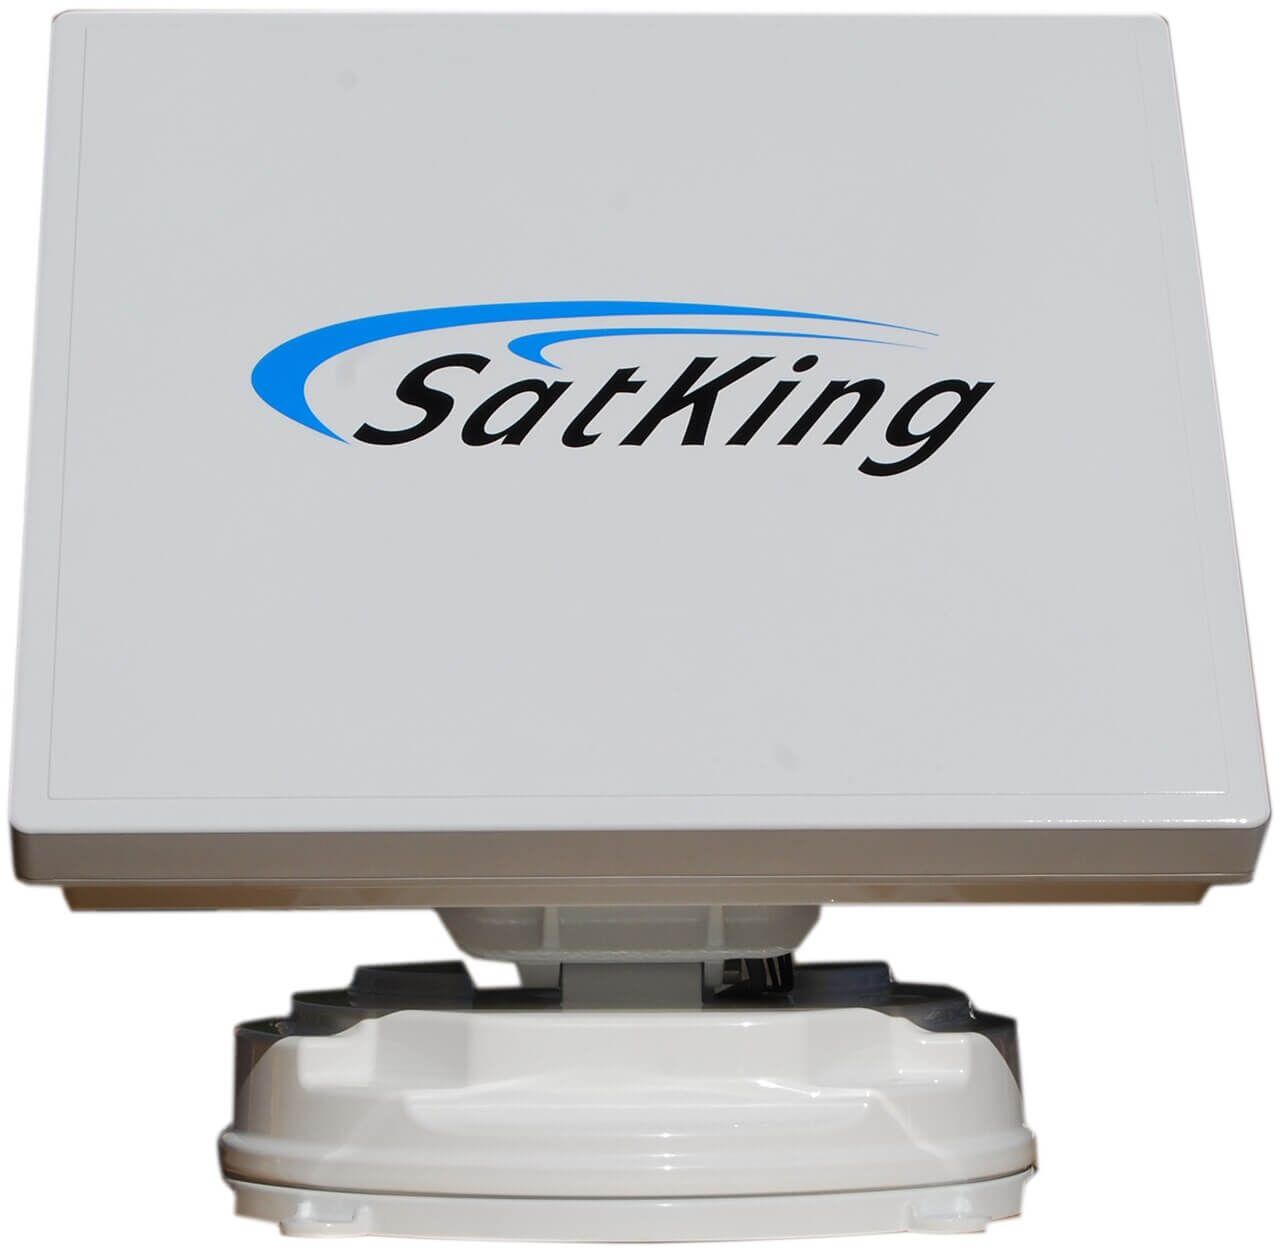 Caravan Satellite TV Systems – An Essential for RV Enthusiasts